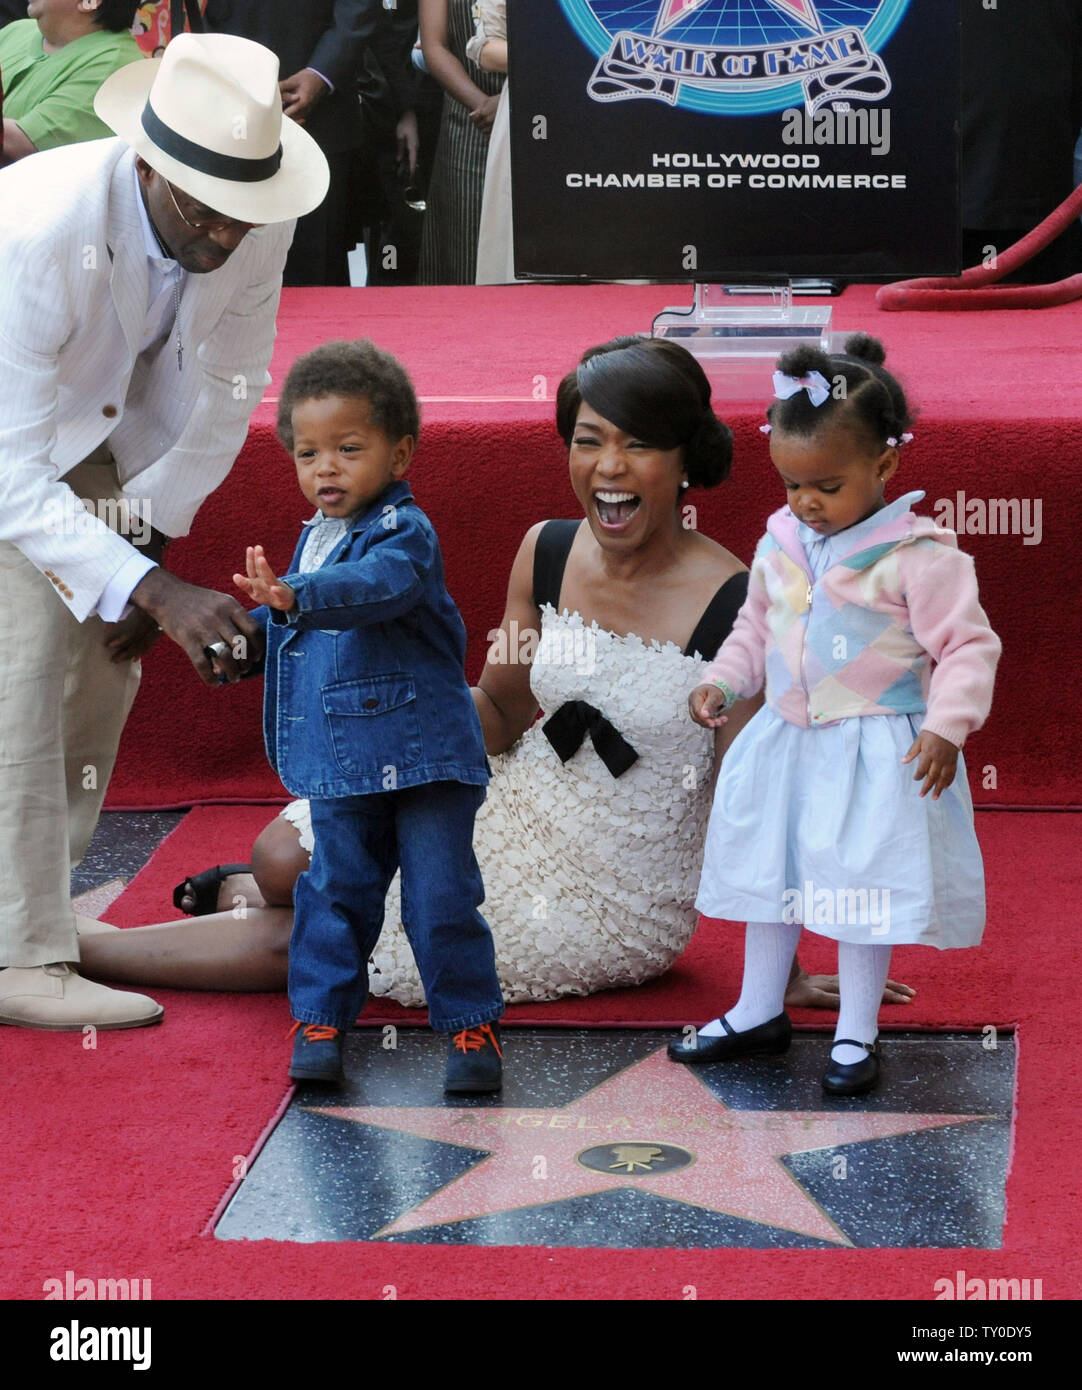 Actress Angela Bassett laughs as her son Slater Josiah and daughter Bronwyn Golden with actor Courtney B. Vance (L), walk on her star on the Hollywood Walk of Fame in Los Angeles on March 20, 2008. Bassett was the 2,358th celebrity to be honored with a star during an unveiling ceremony attended by family, fans and friends.  (UPI Photo/Jim Ruymen) Stock Photo